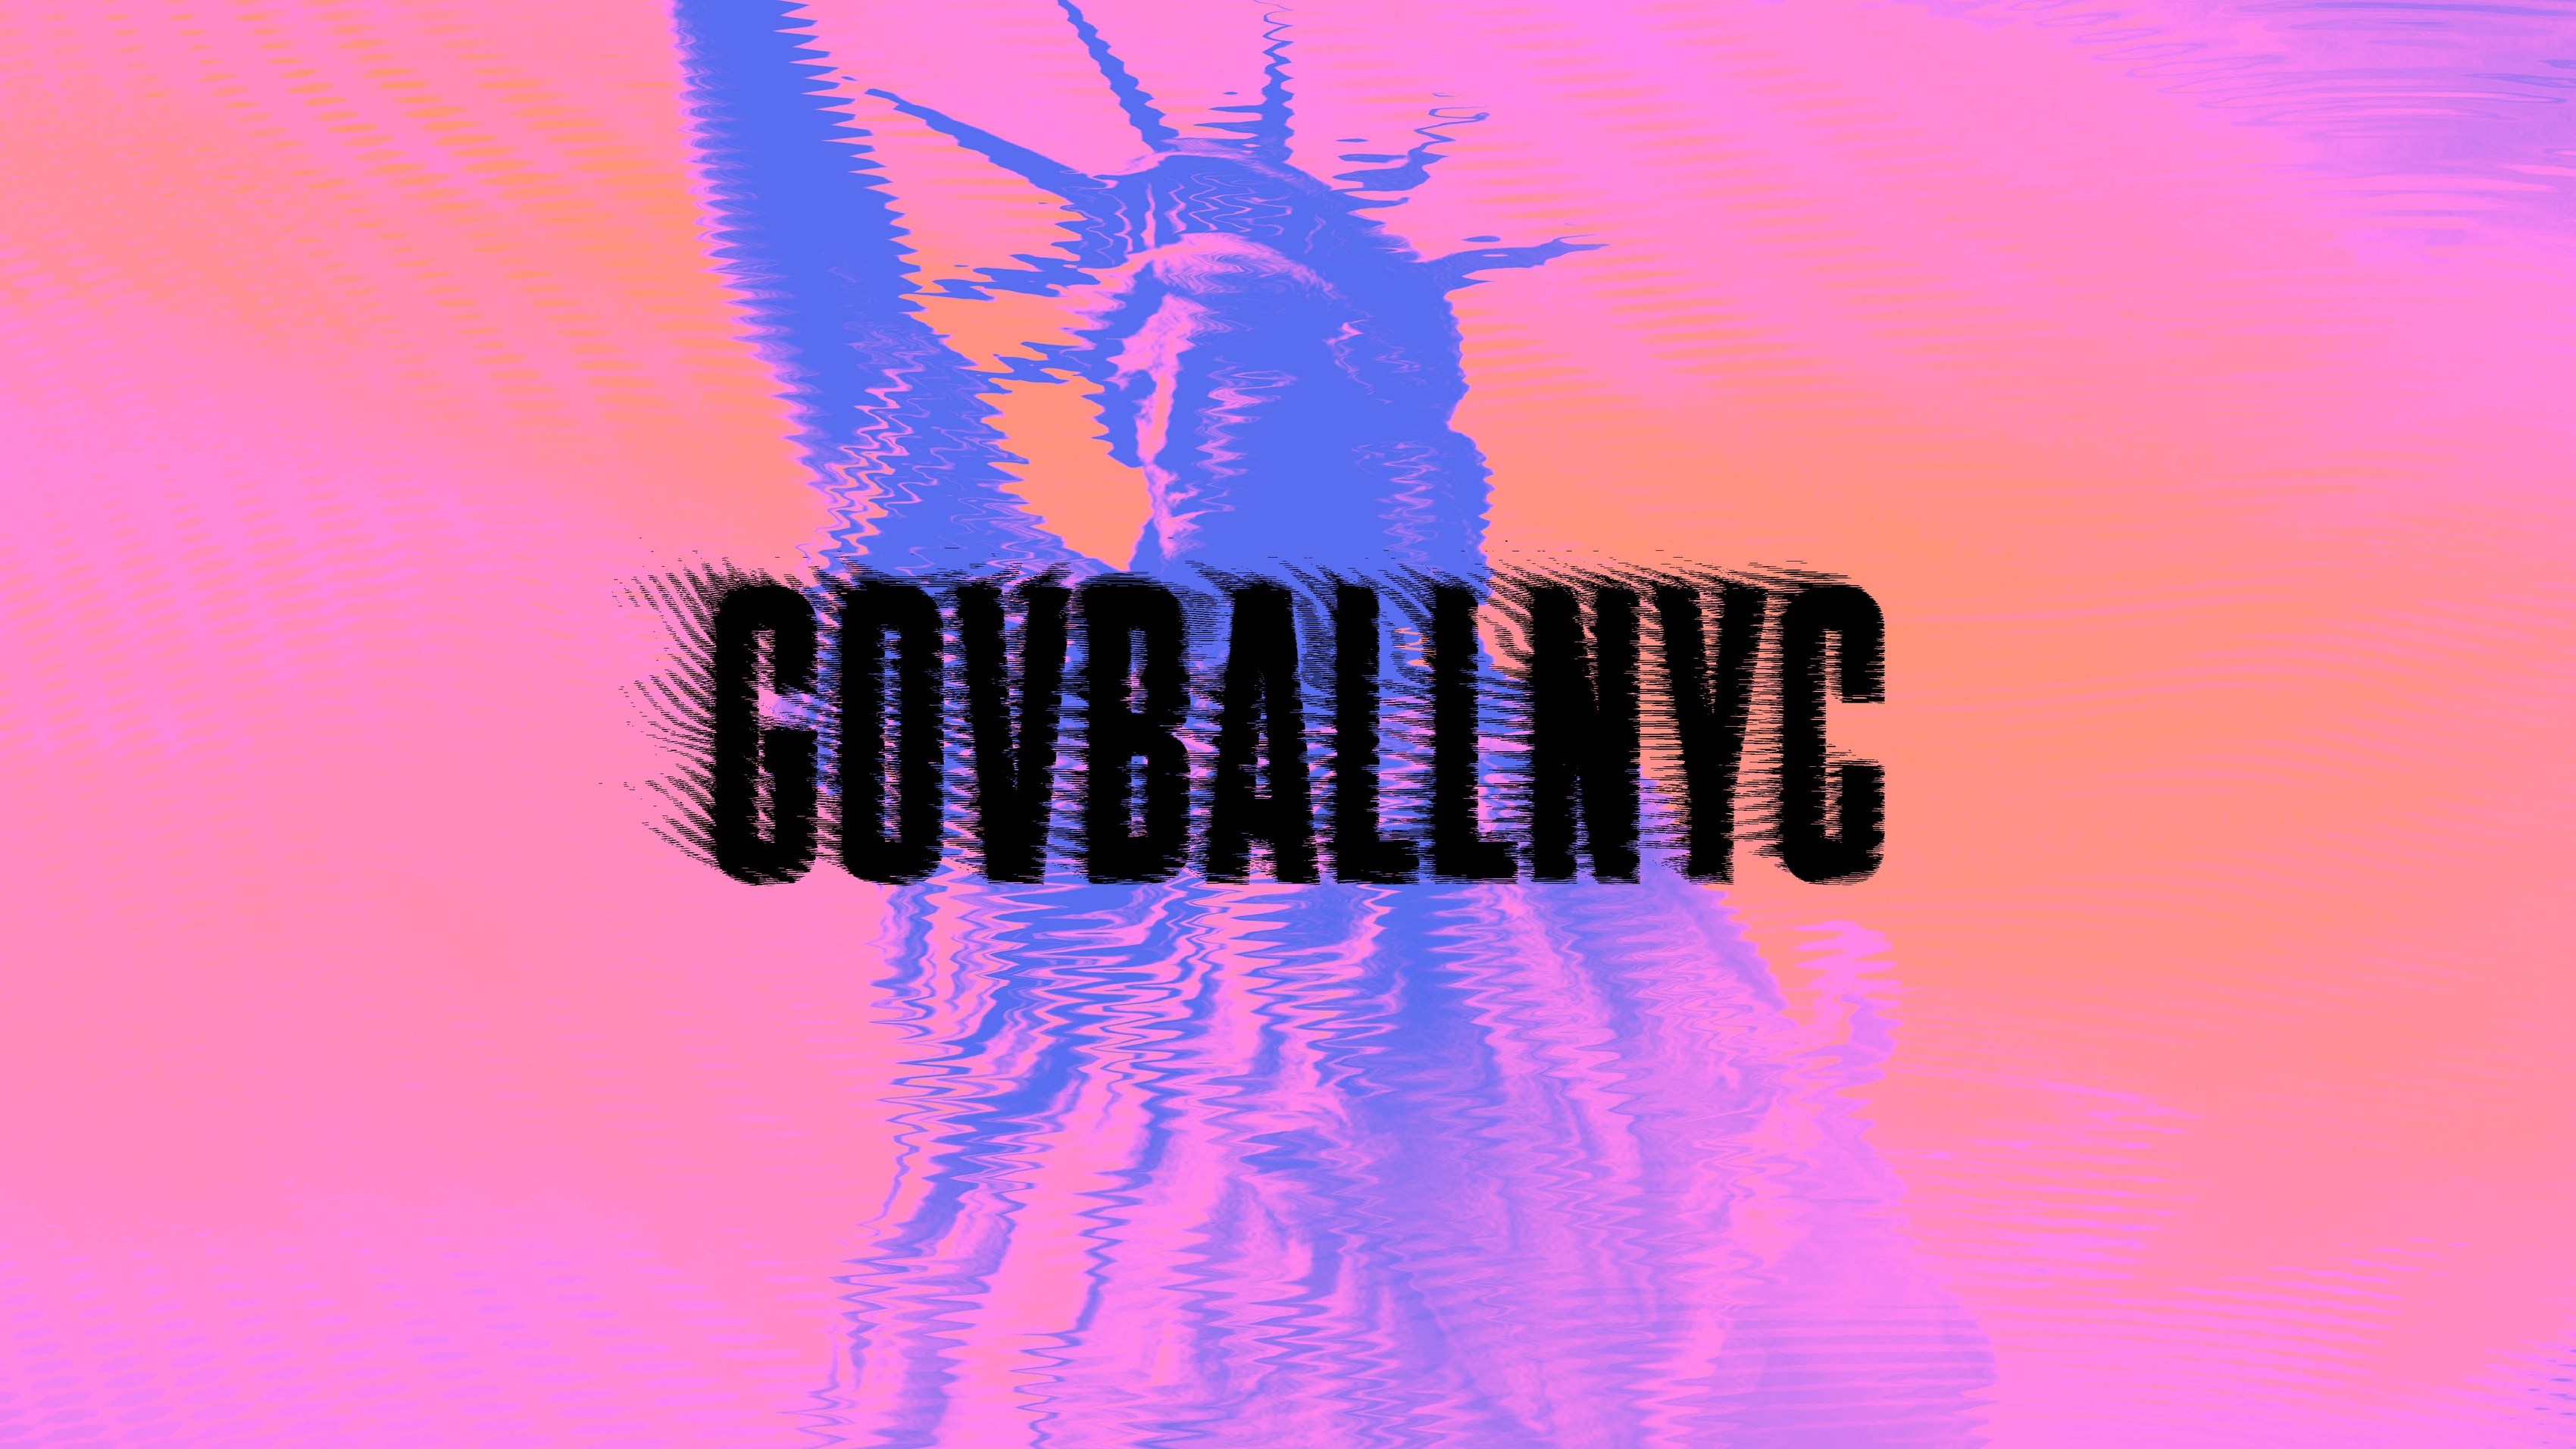 Low-res rendering of the Statue of Liberty in funky colors, with the Gov Ball NYC logo over top